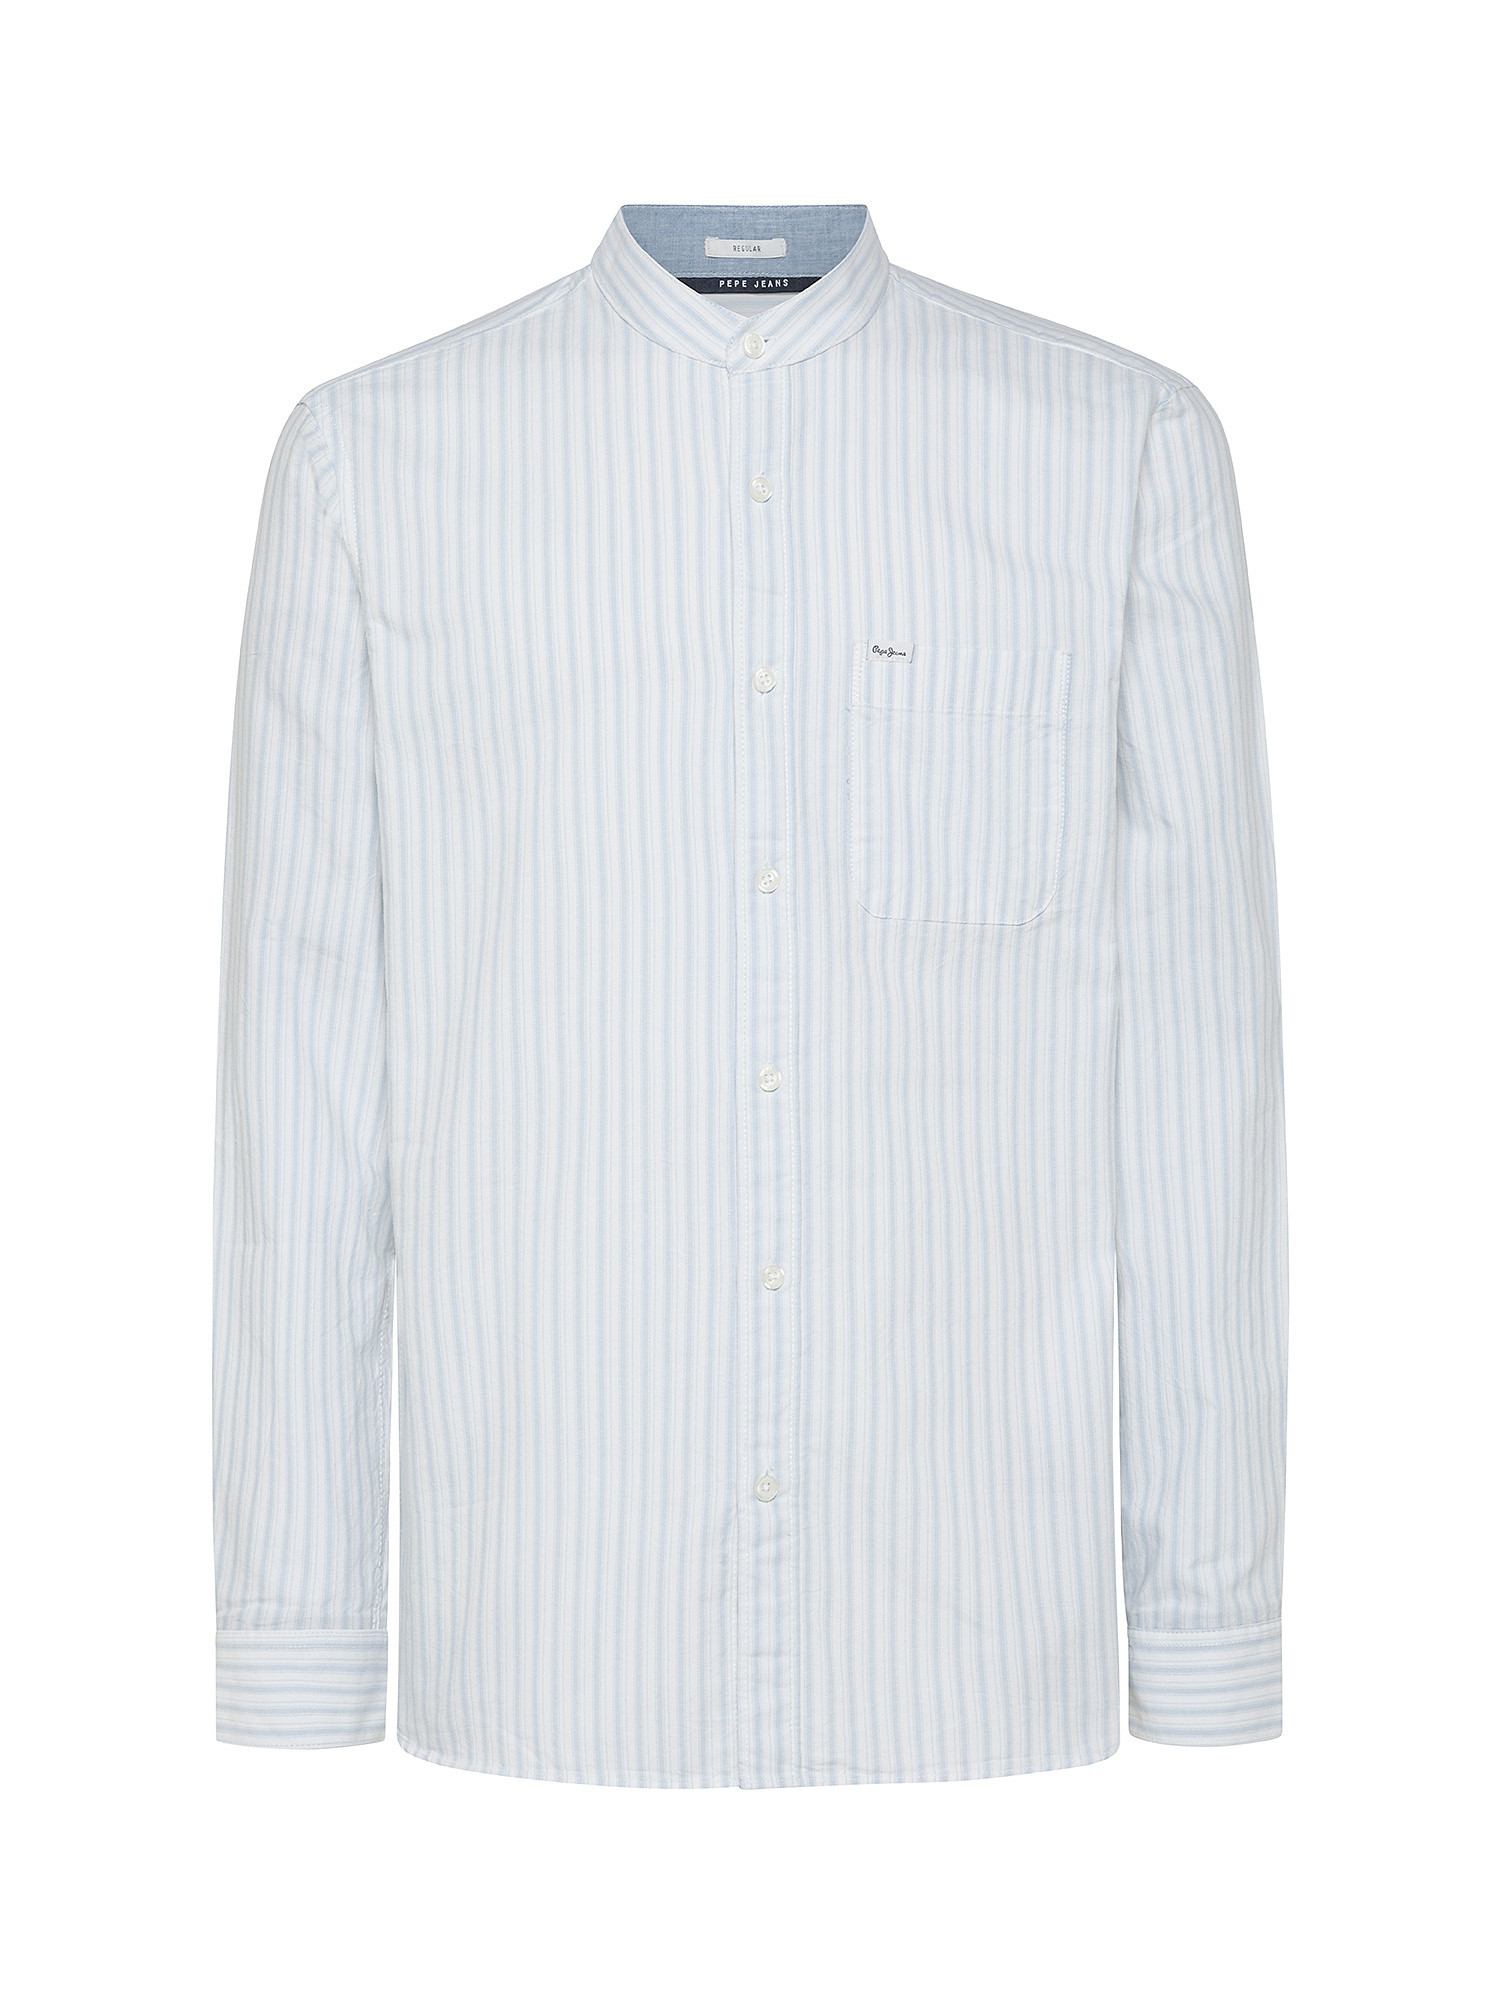 Pepe Jeans - Regular fit striped shirt, White, large image number 1